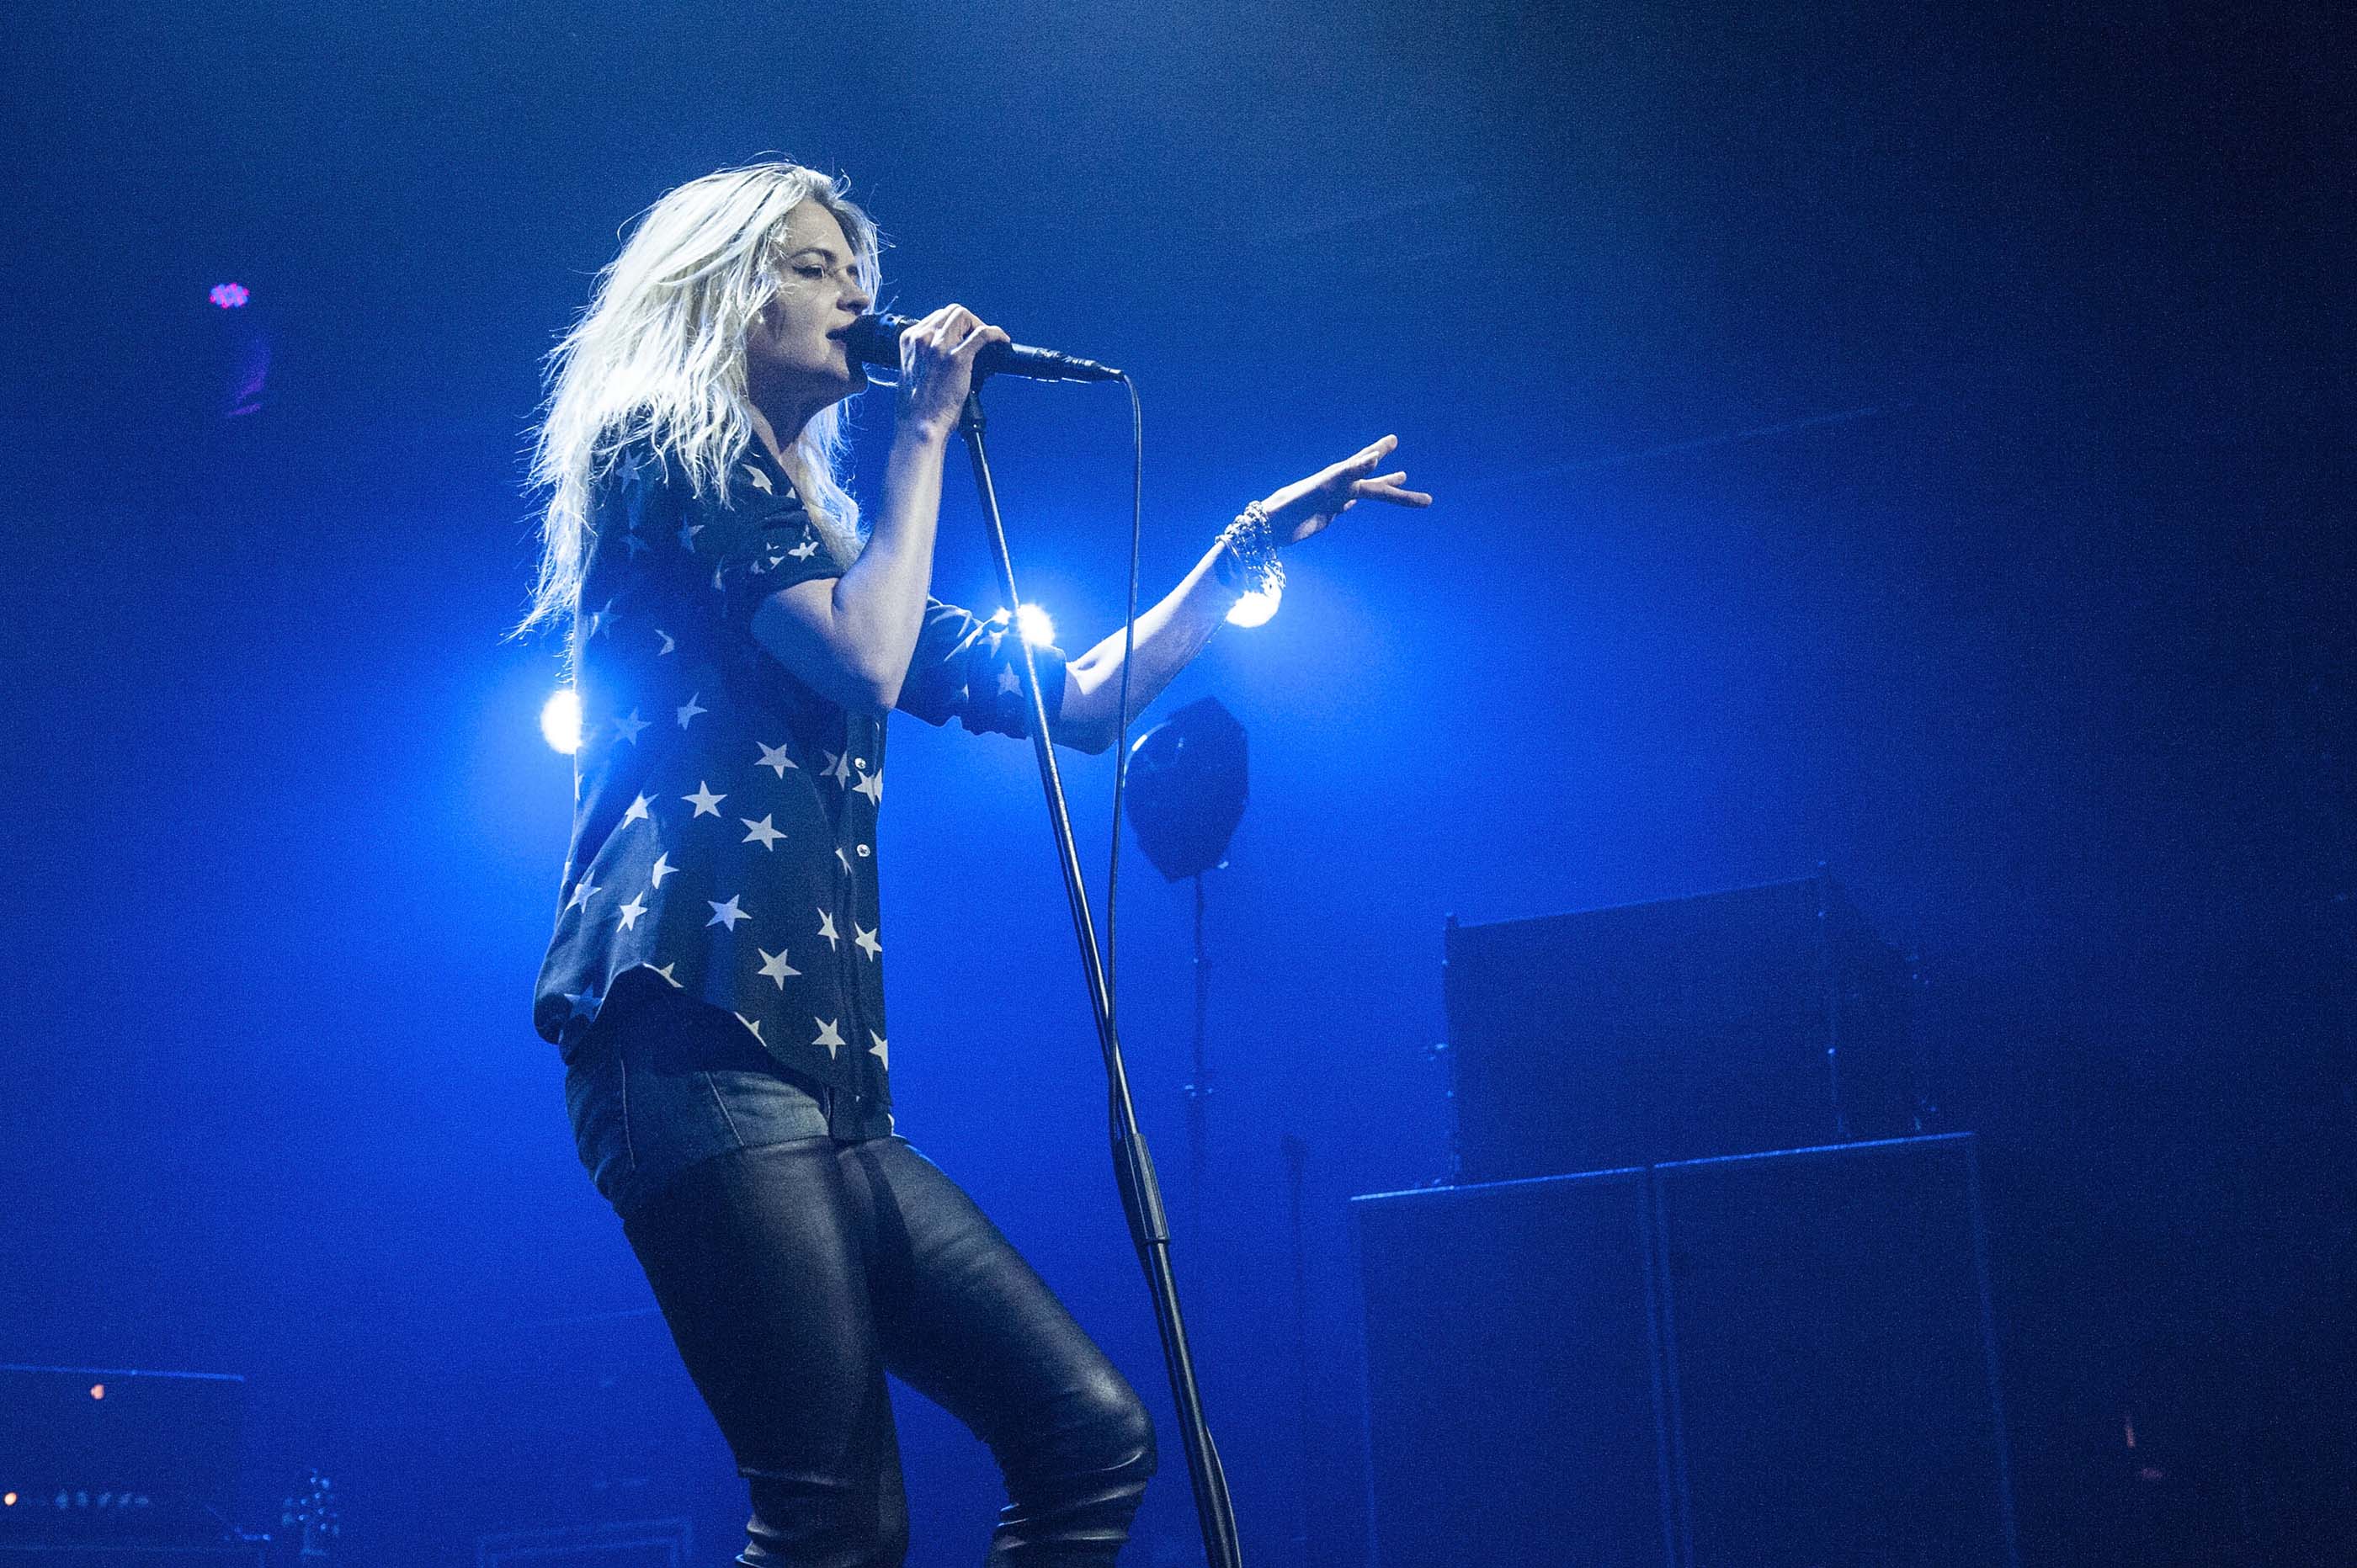 Alison Mosshart performs at the 2016 Park Live international music festival